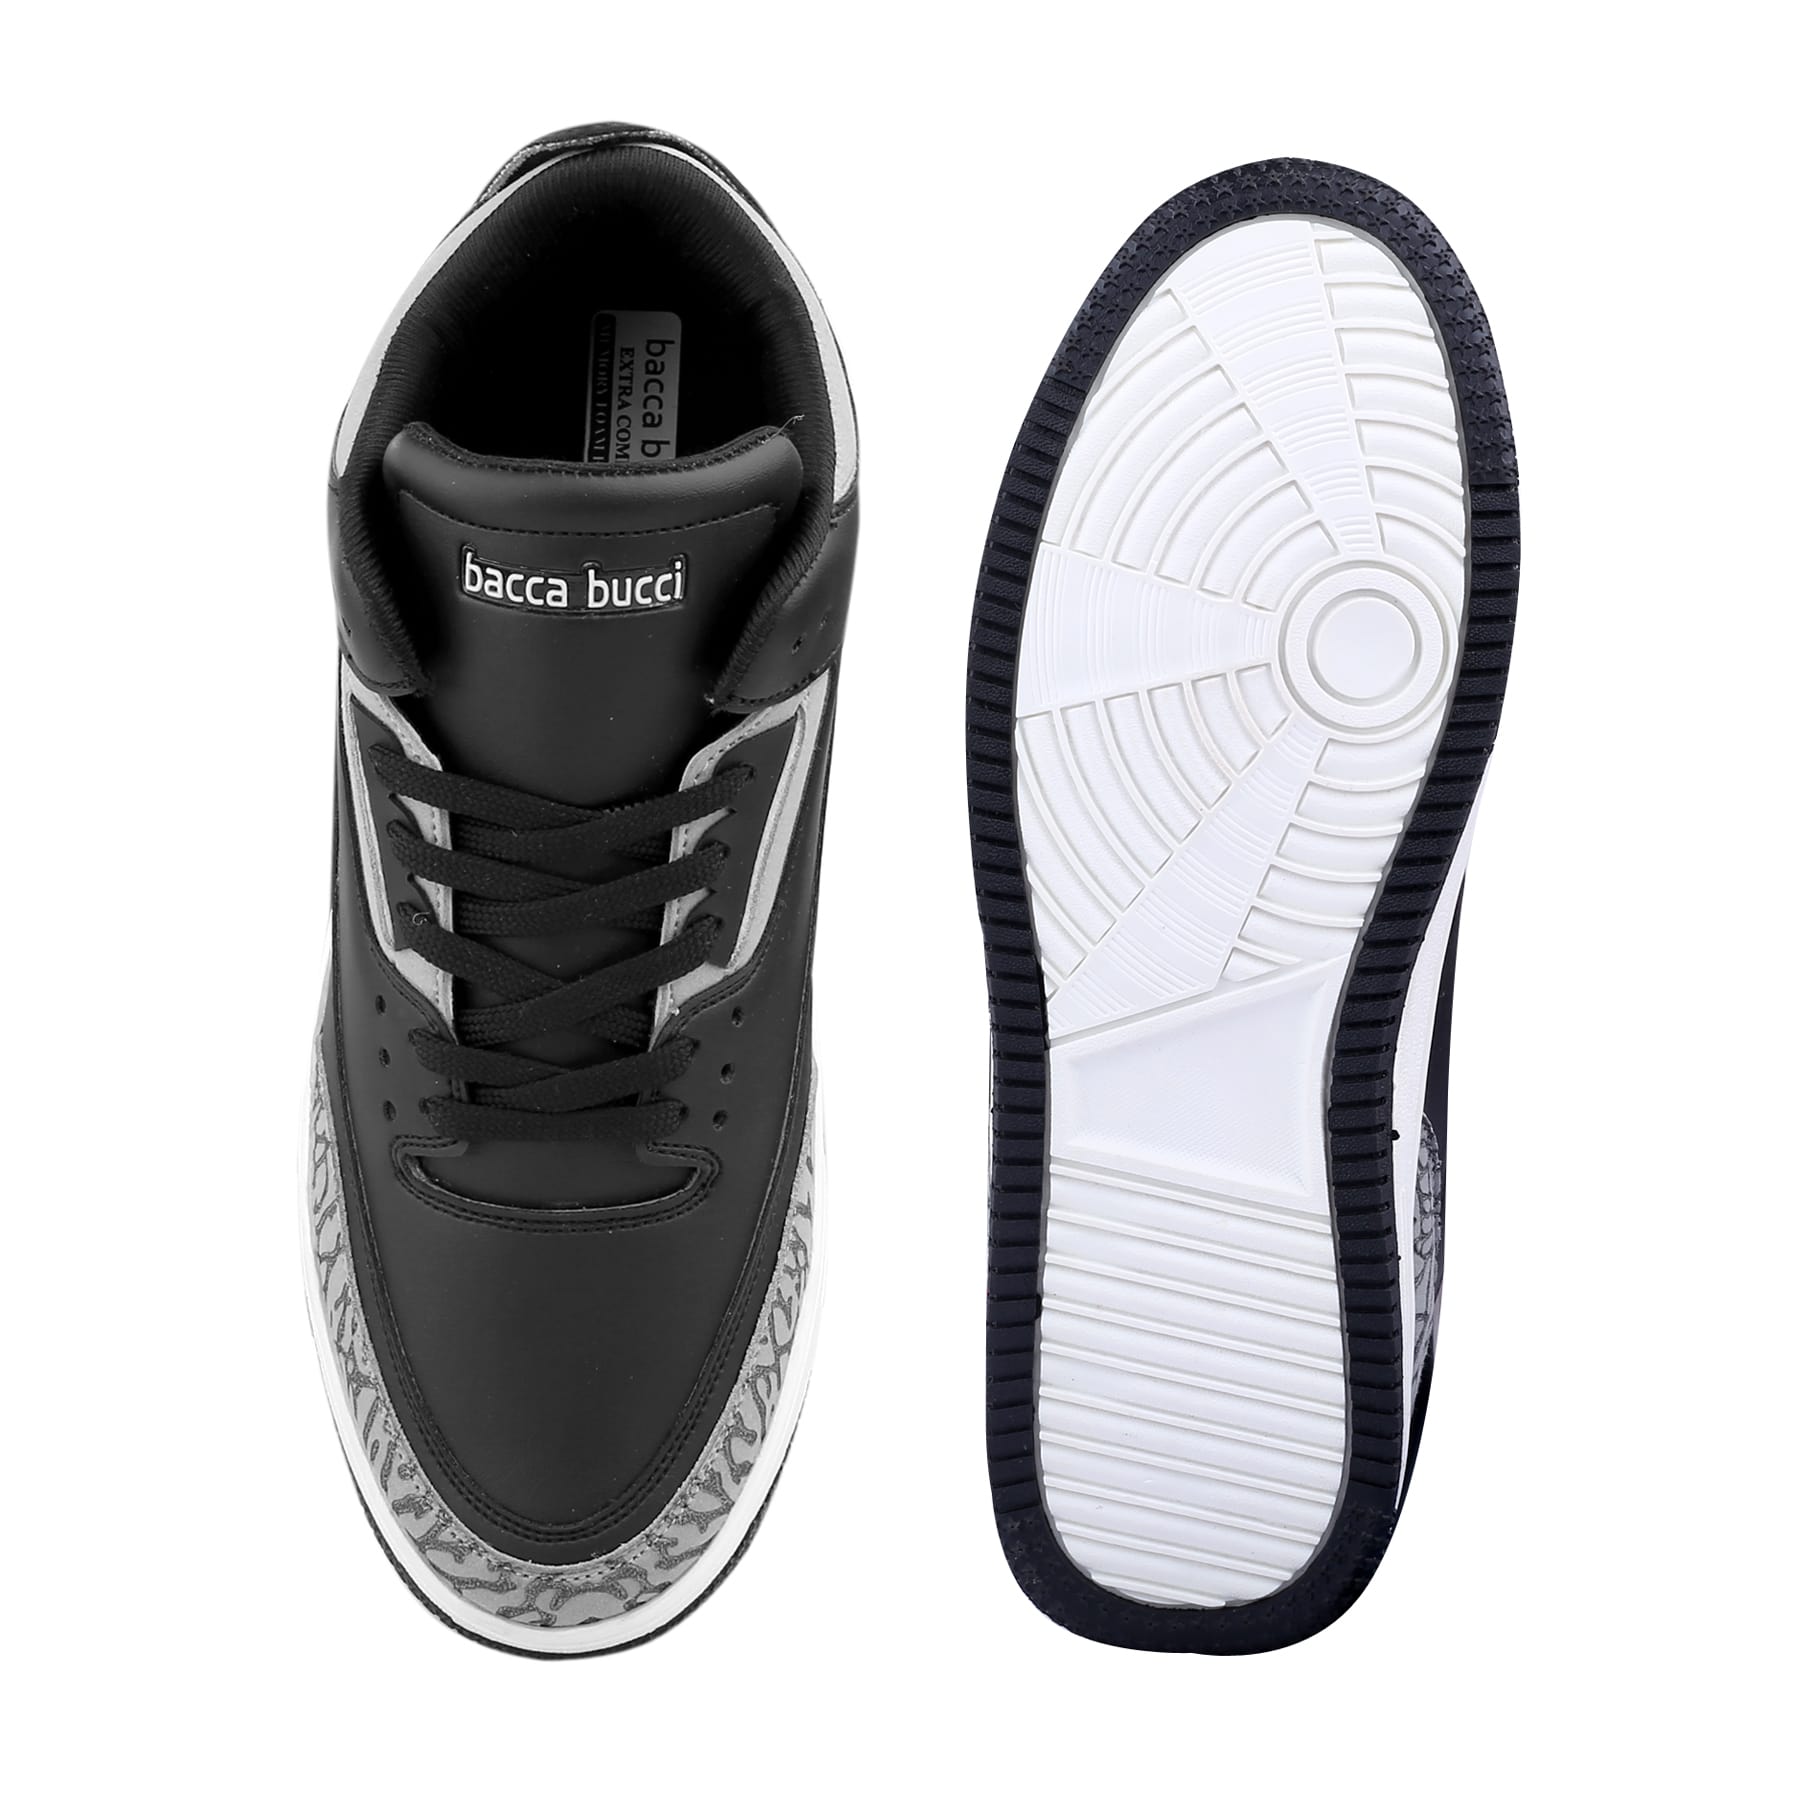 Bacca Bucci VORTEX Mid-top Flat Sole Street Fashion Men's Sneakers Lightweighted Rubber Outsole